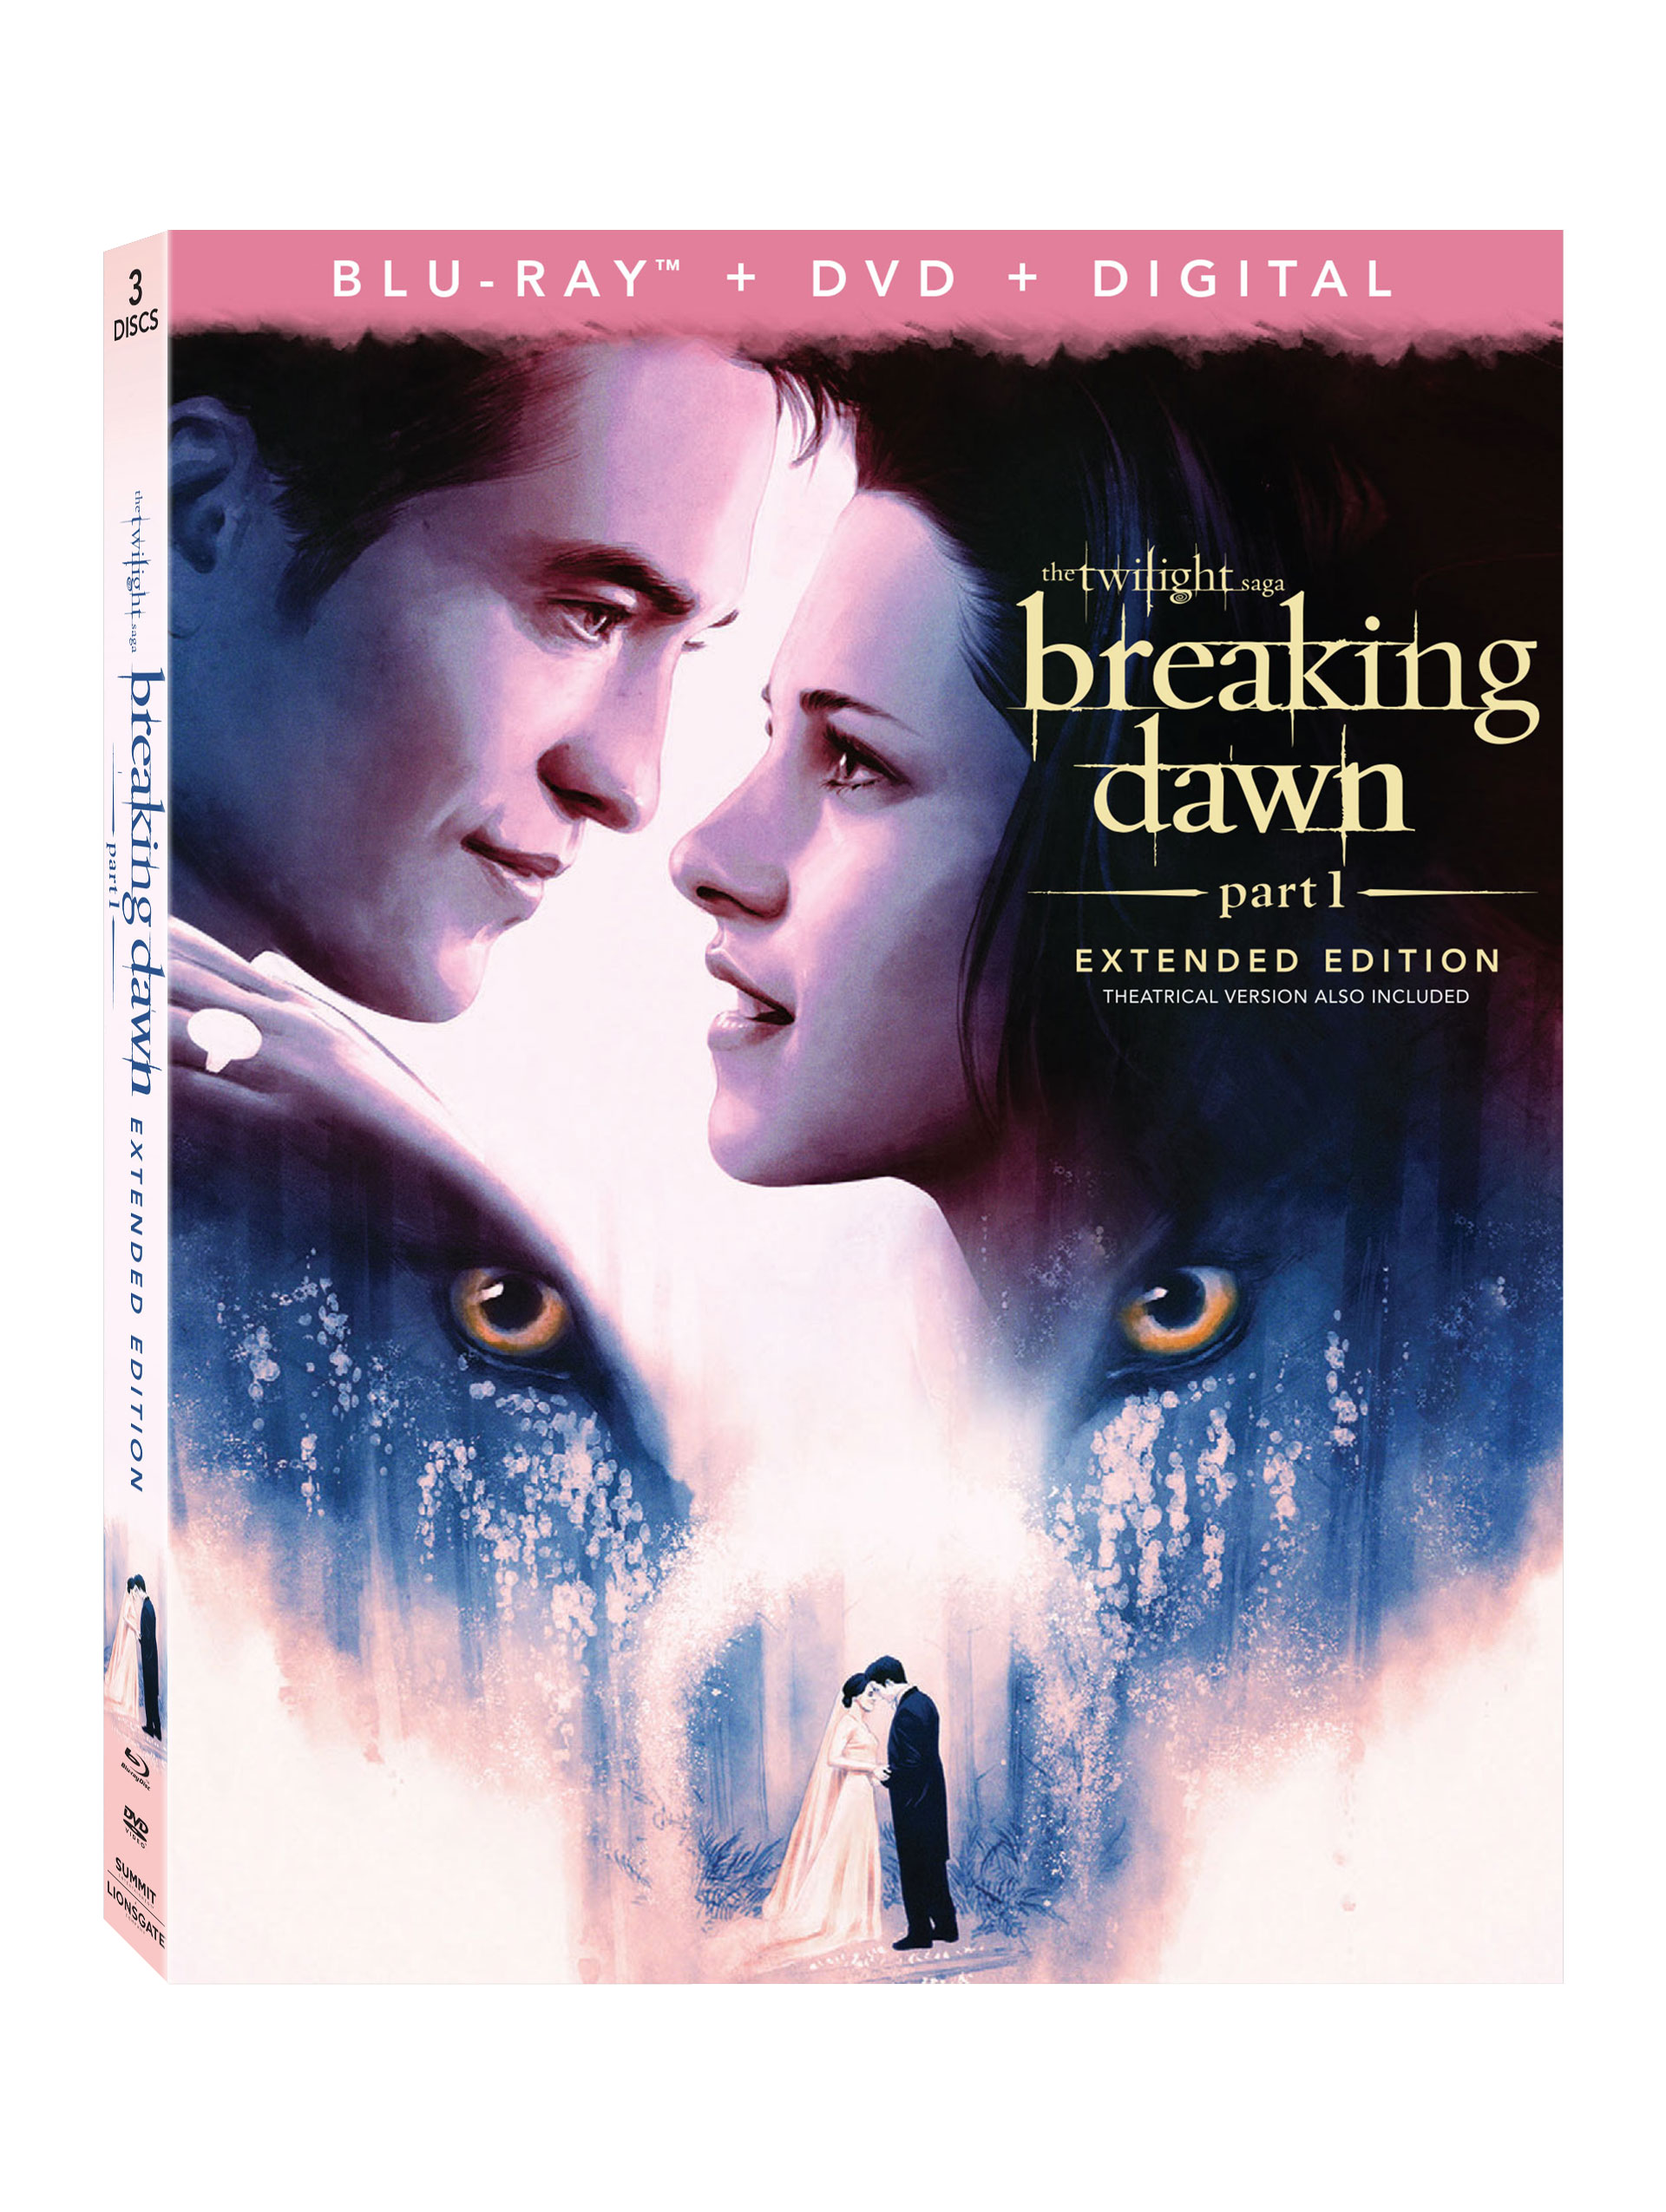 The Twilight Saga Breaking Dawn Part 1 Blu-Ray Combo Pack Cover (Lionsgate Home Entertainment)